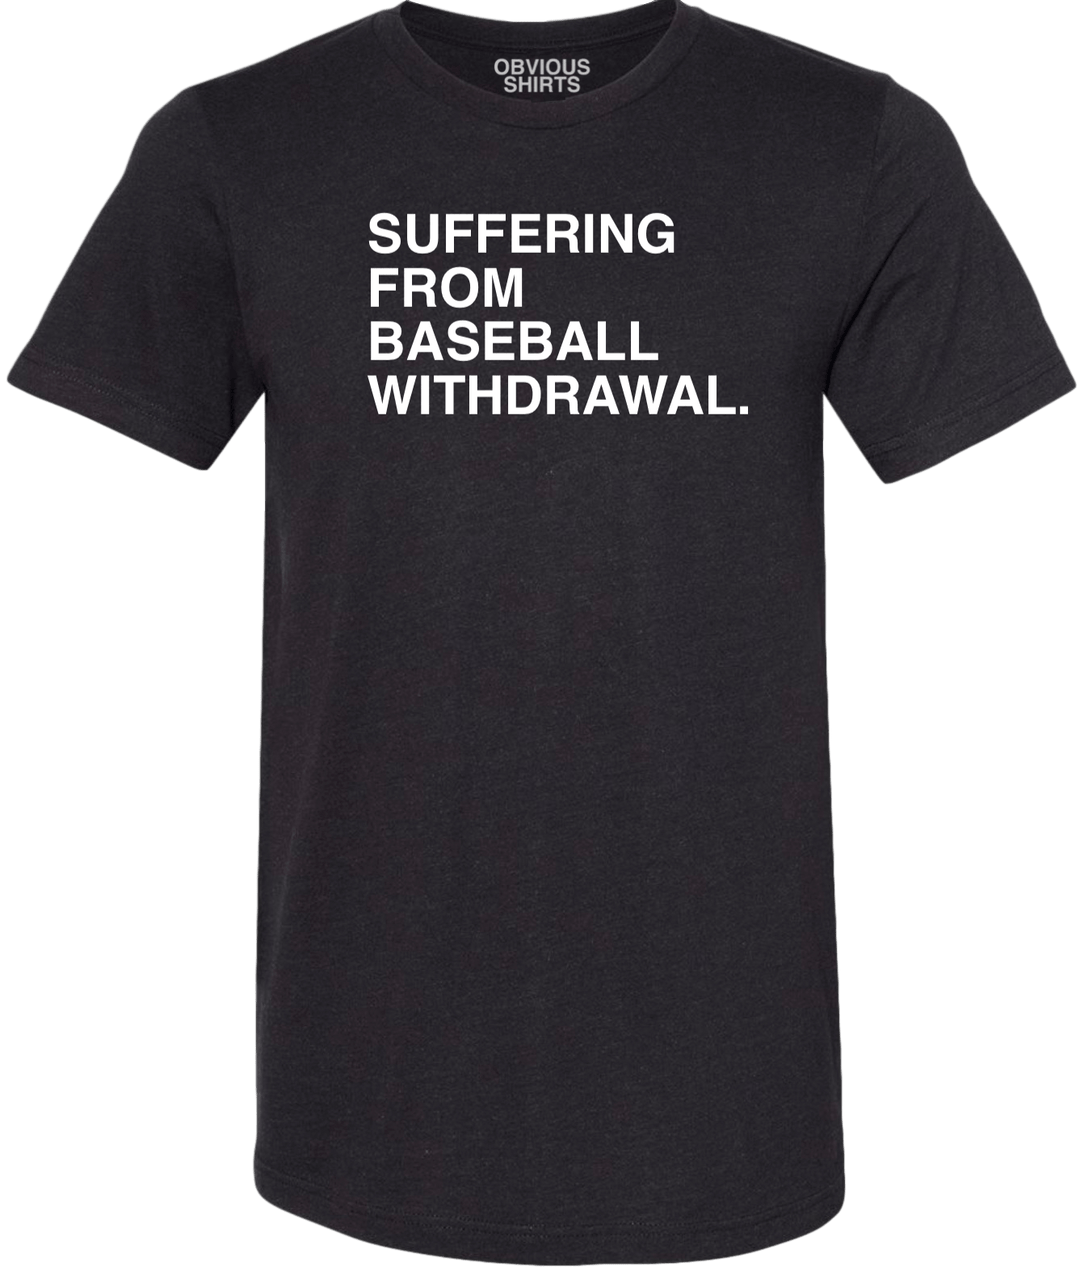 SUFFERING FROM BASEBALL WITHDRAWAL. (SOUTH SIDE) - OBVIOUS SHIRTS.